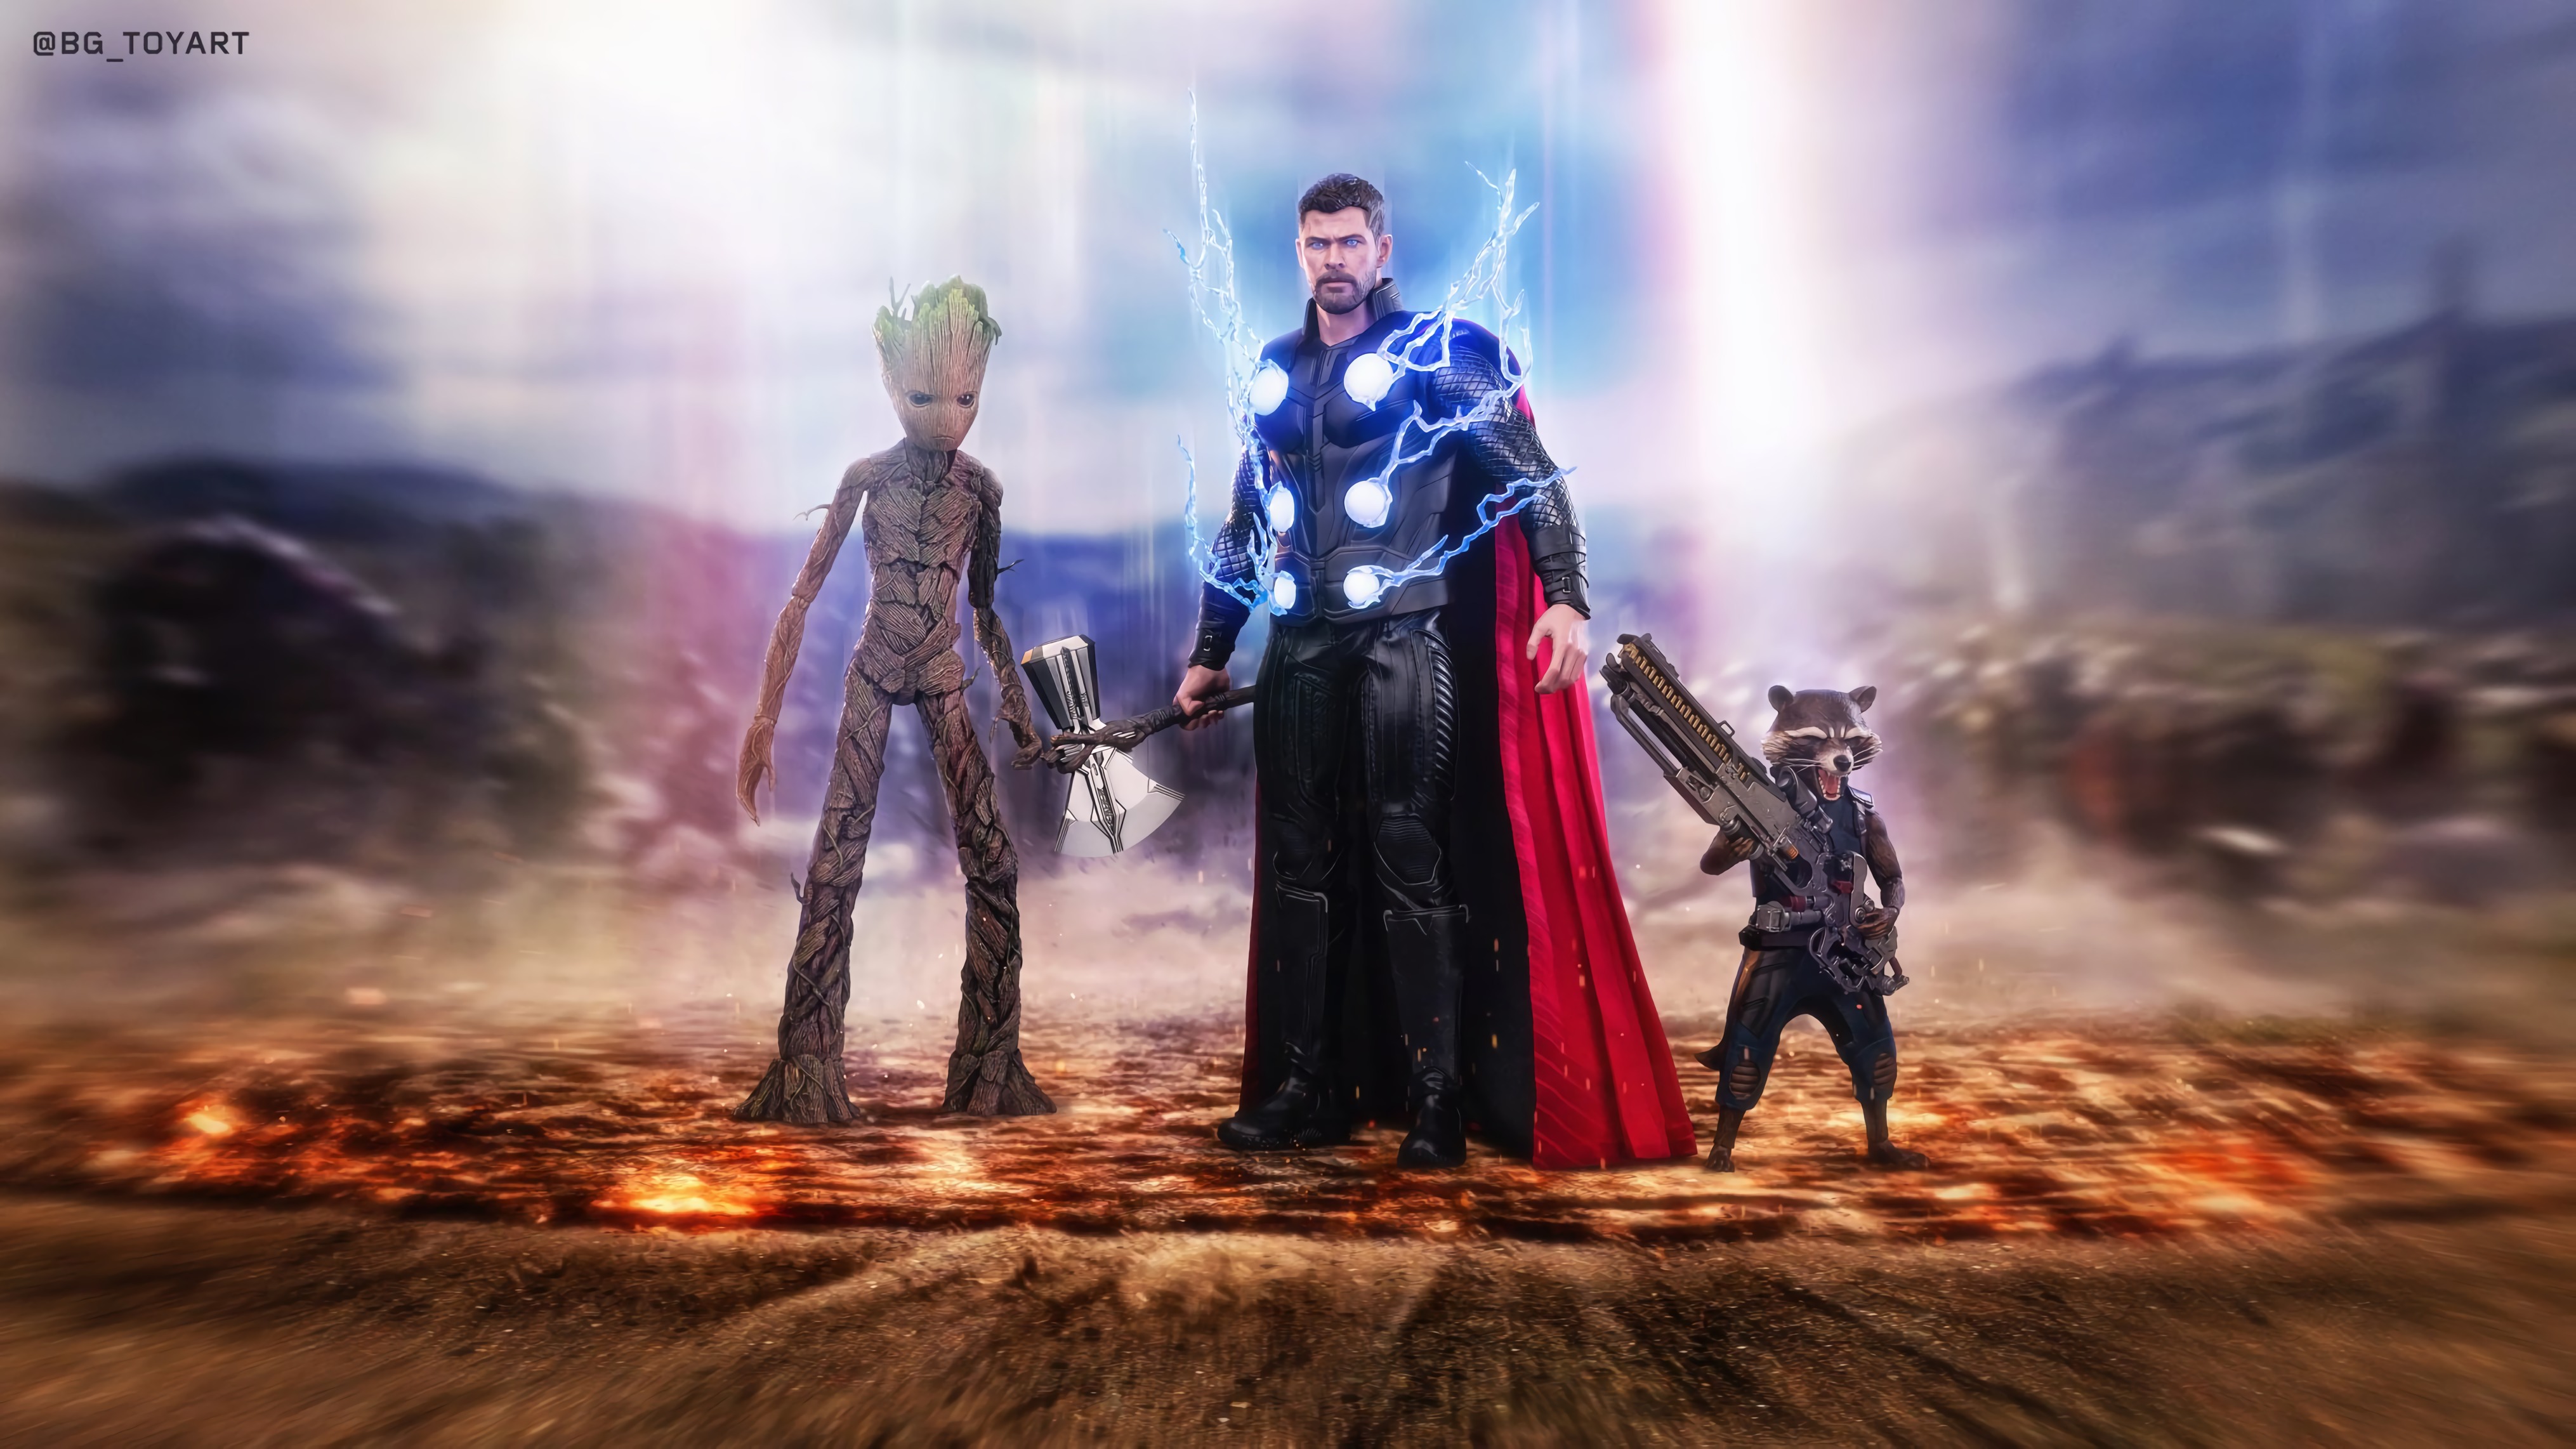 Thor rocket and groot hd superheroes k wallpapers images backgrounds photos and pictures